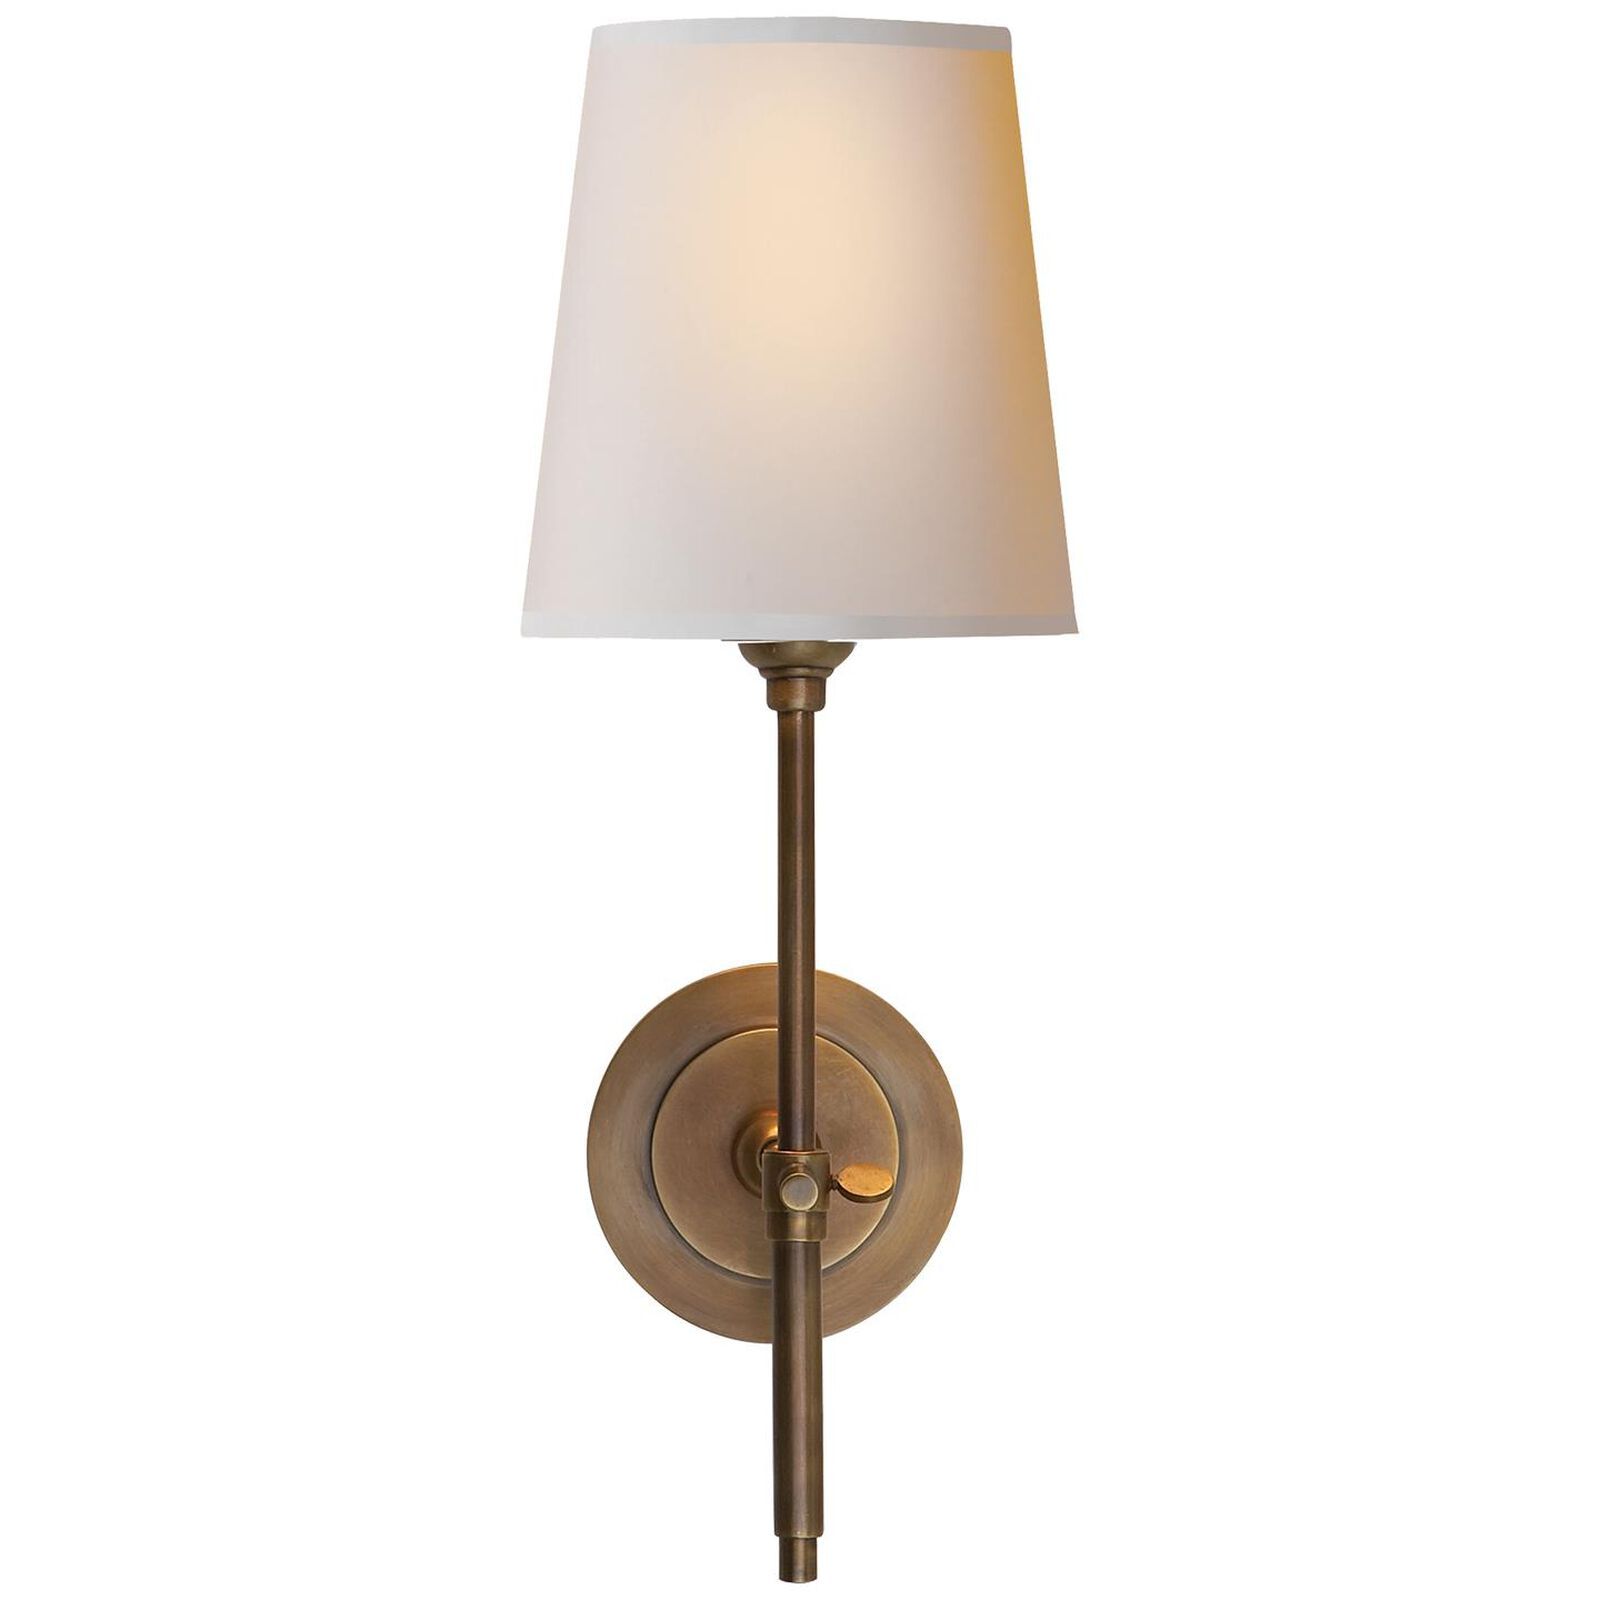 Thomas O'Brien Bryant 14 Inch Wall Sconce by Visual Comfort and Co. | Capitol Lighting 1800lighting.com